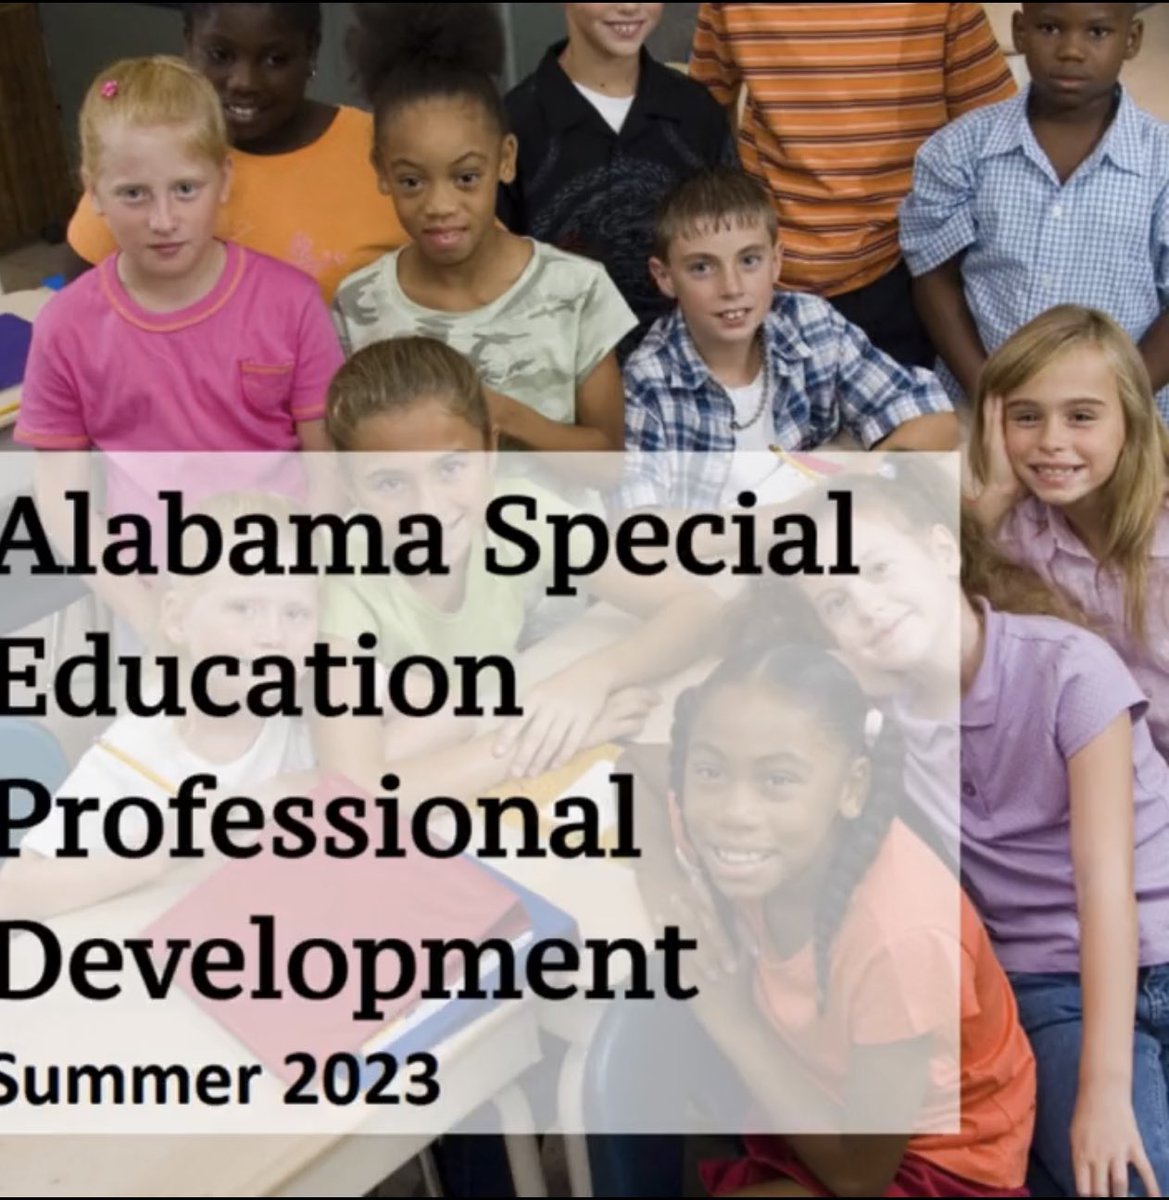 Professional Development Opportunities for Special Education Teachers are available … join us for a series of courses designed for educators who support literacy in students with disabilities in grades 4-8. Click the link for more information:
 drive.google.com/file/d/12rKAIM…